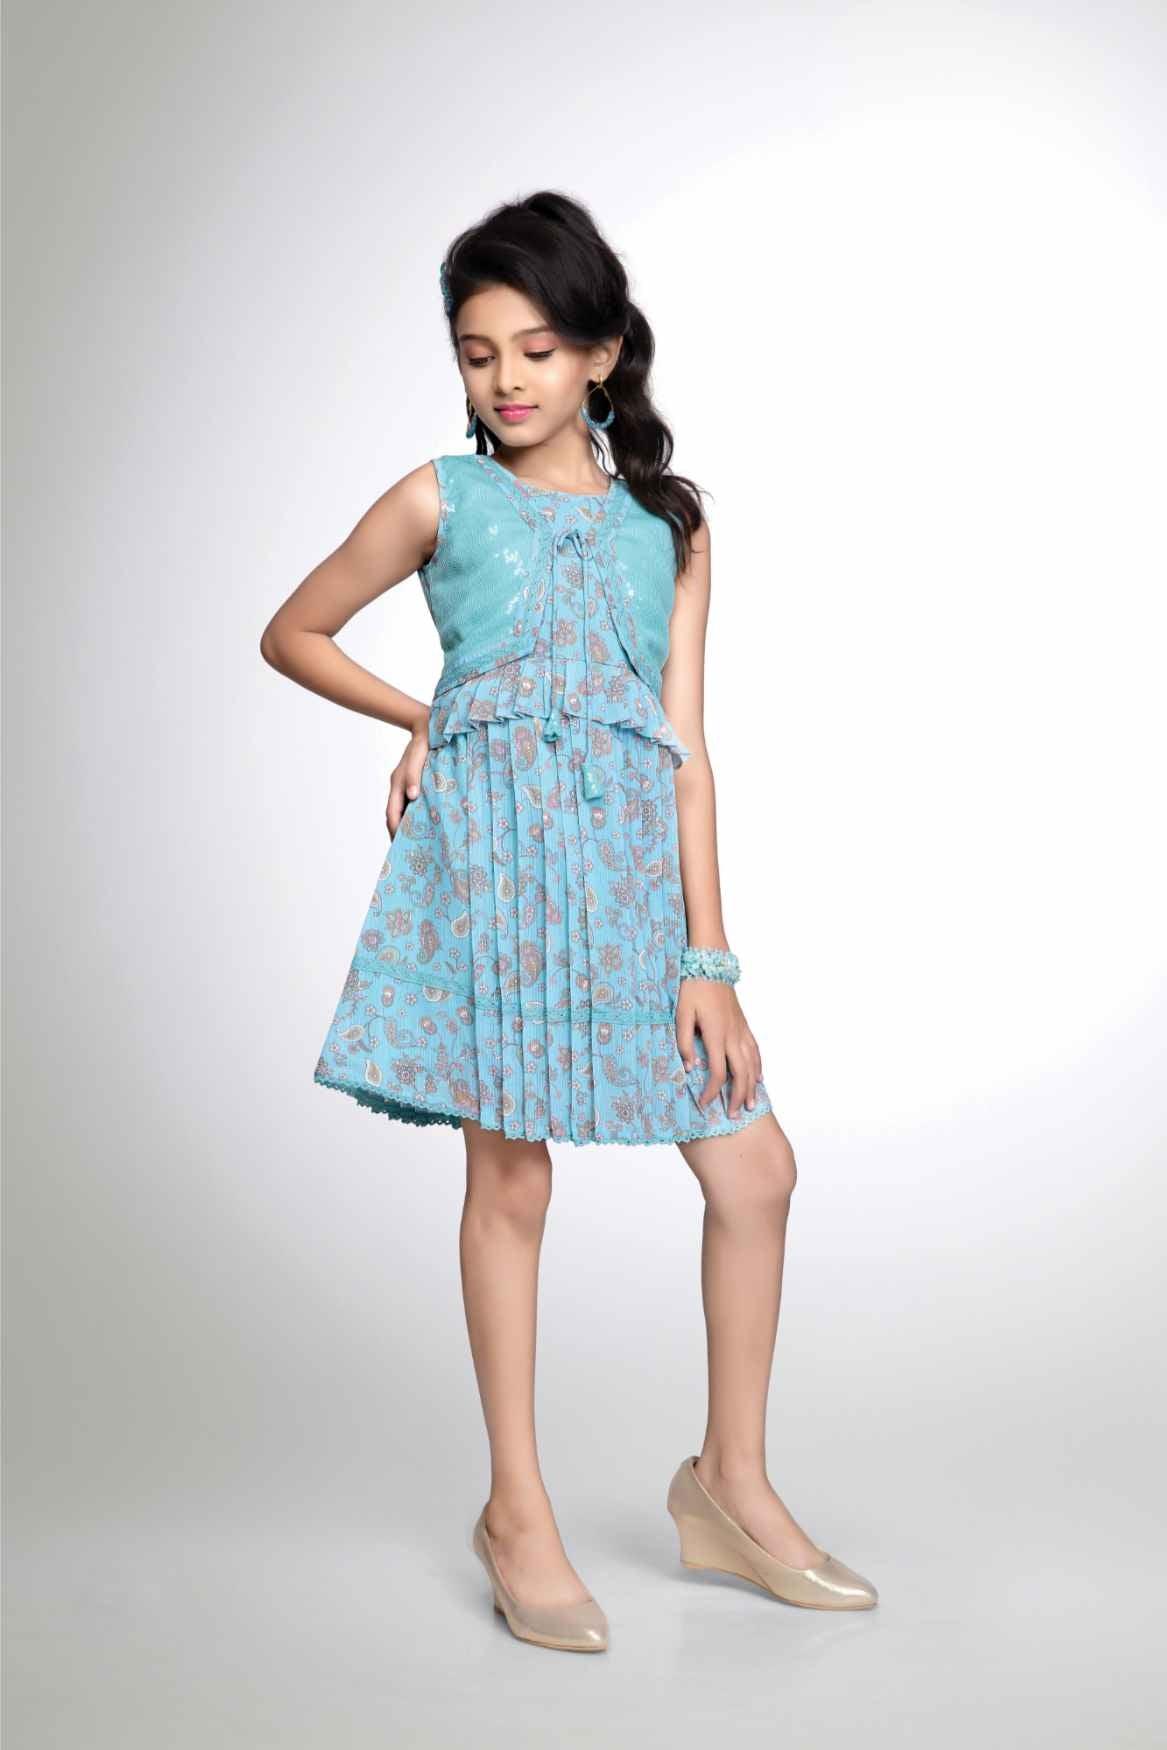 Stylish Blue Floral Cotton Frock With Sequin Work For Girls - Lagorii Kids